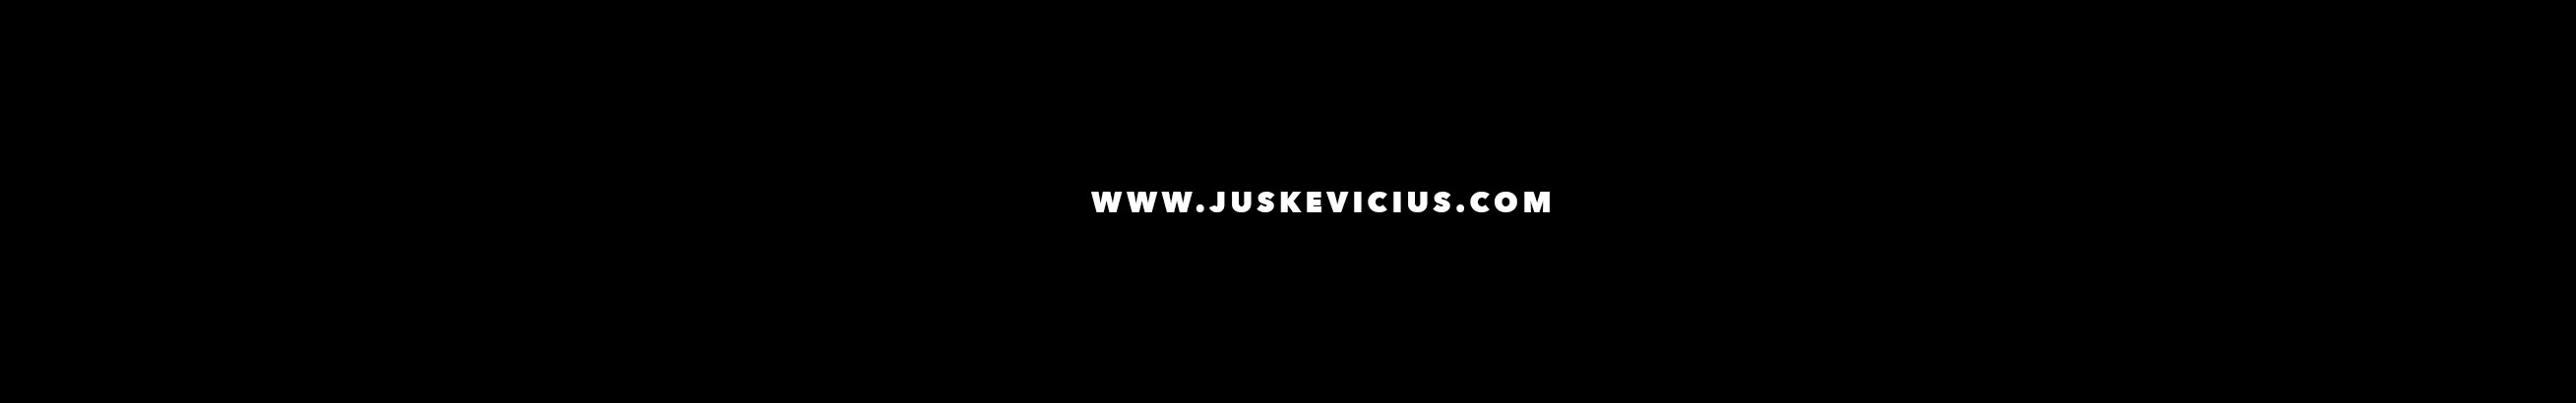 Tom Juskeviciuss profilbanner